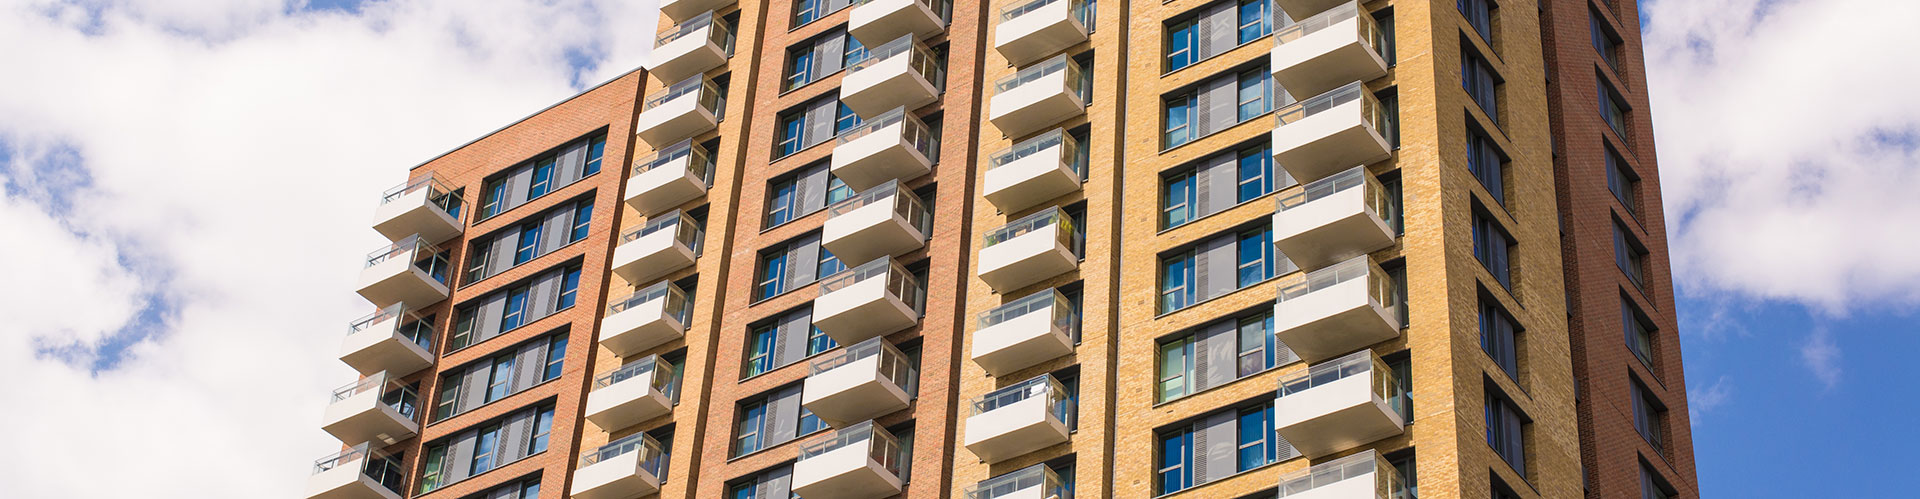 Emergency Preparedness Tips for High-Rise Building Safety